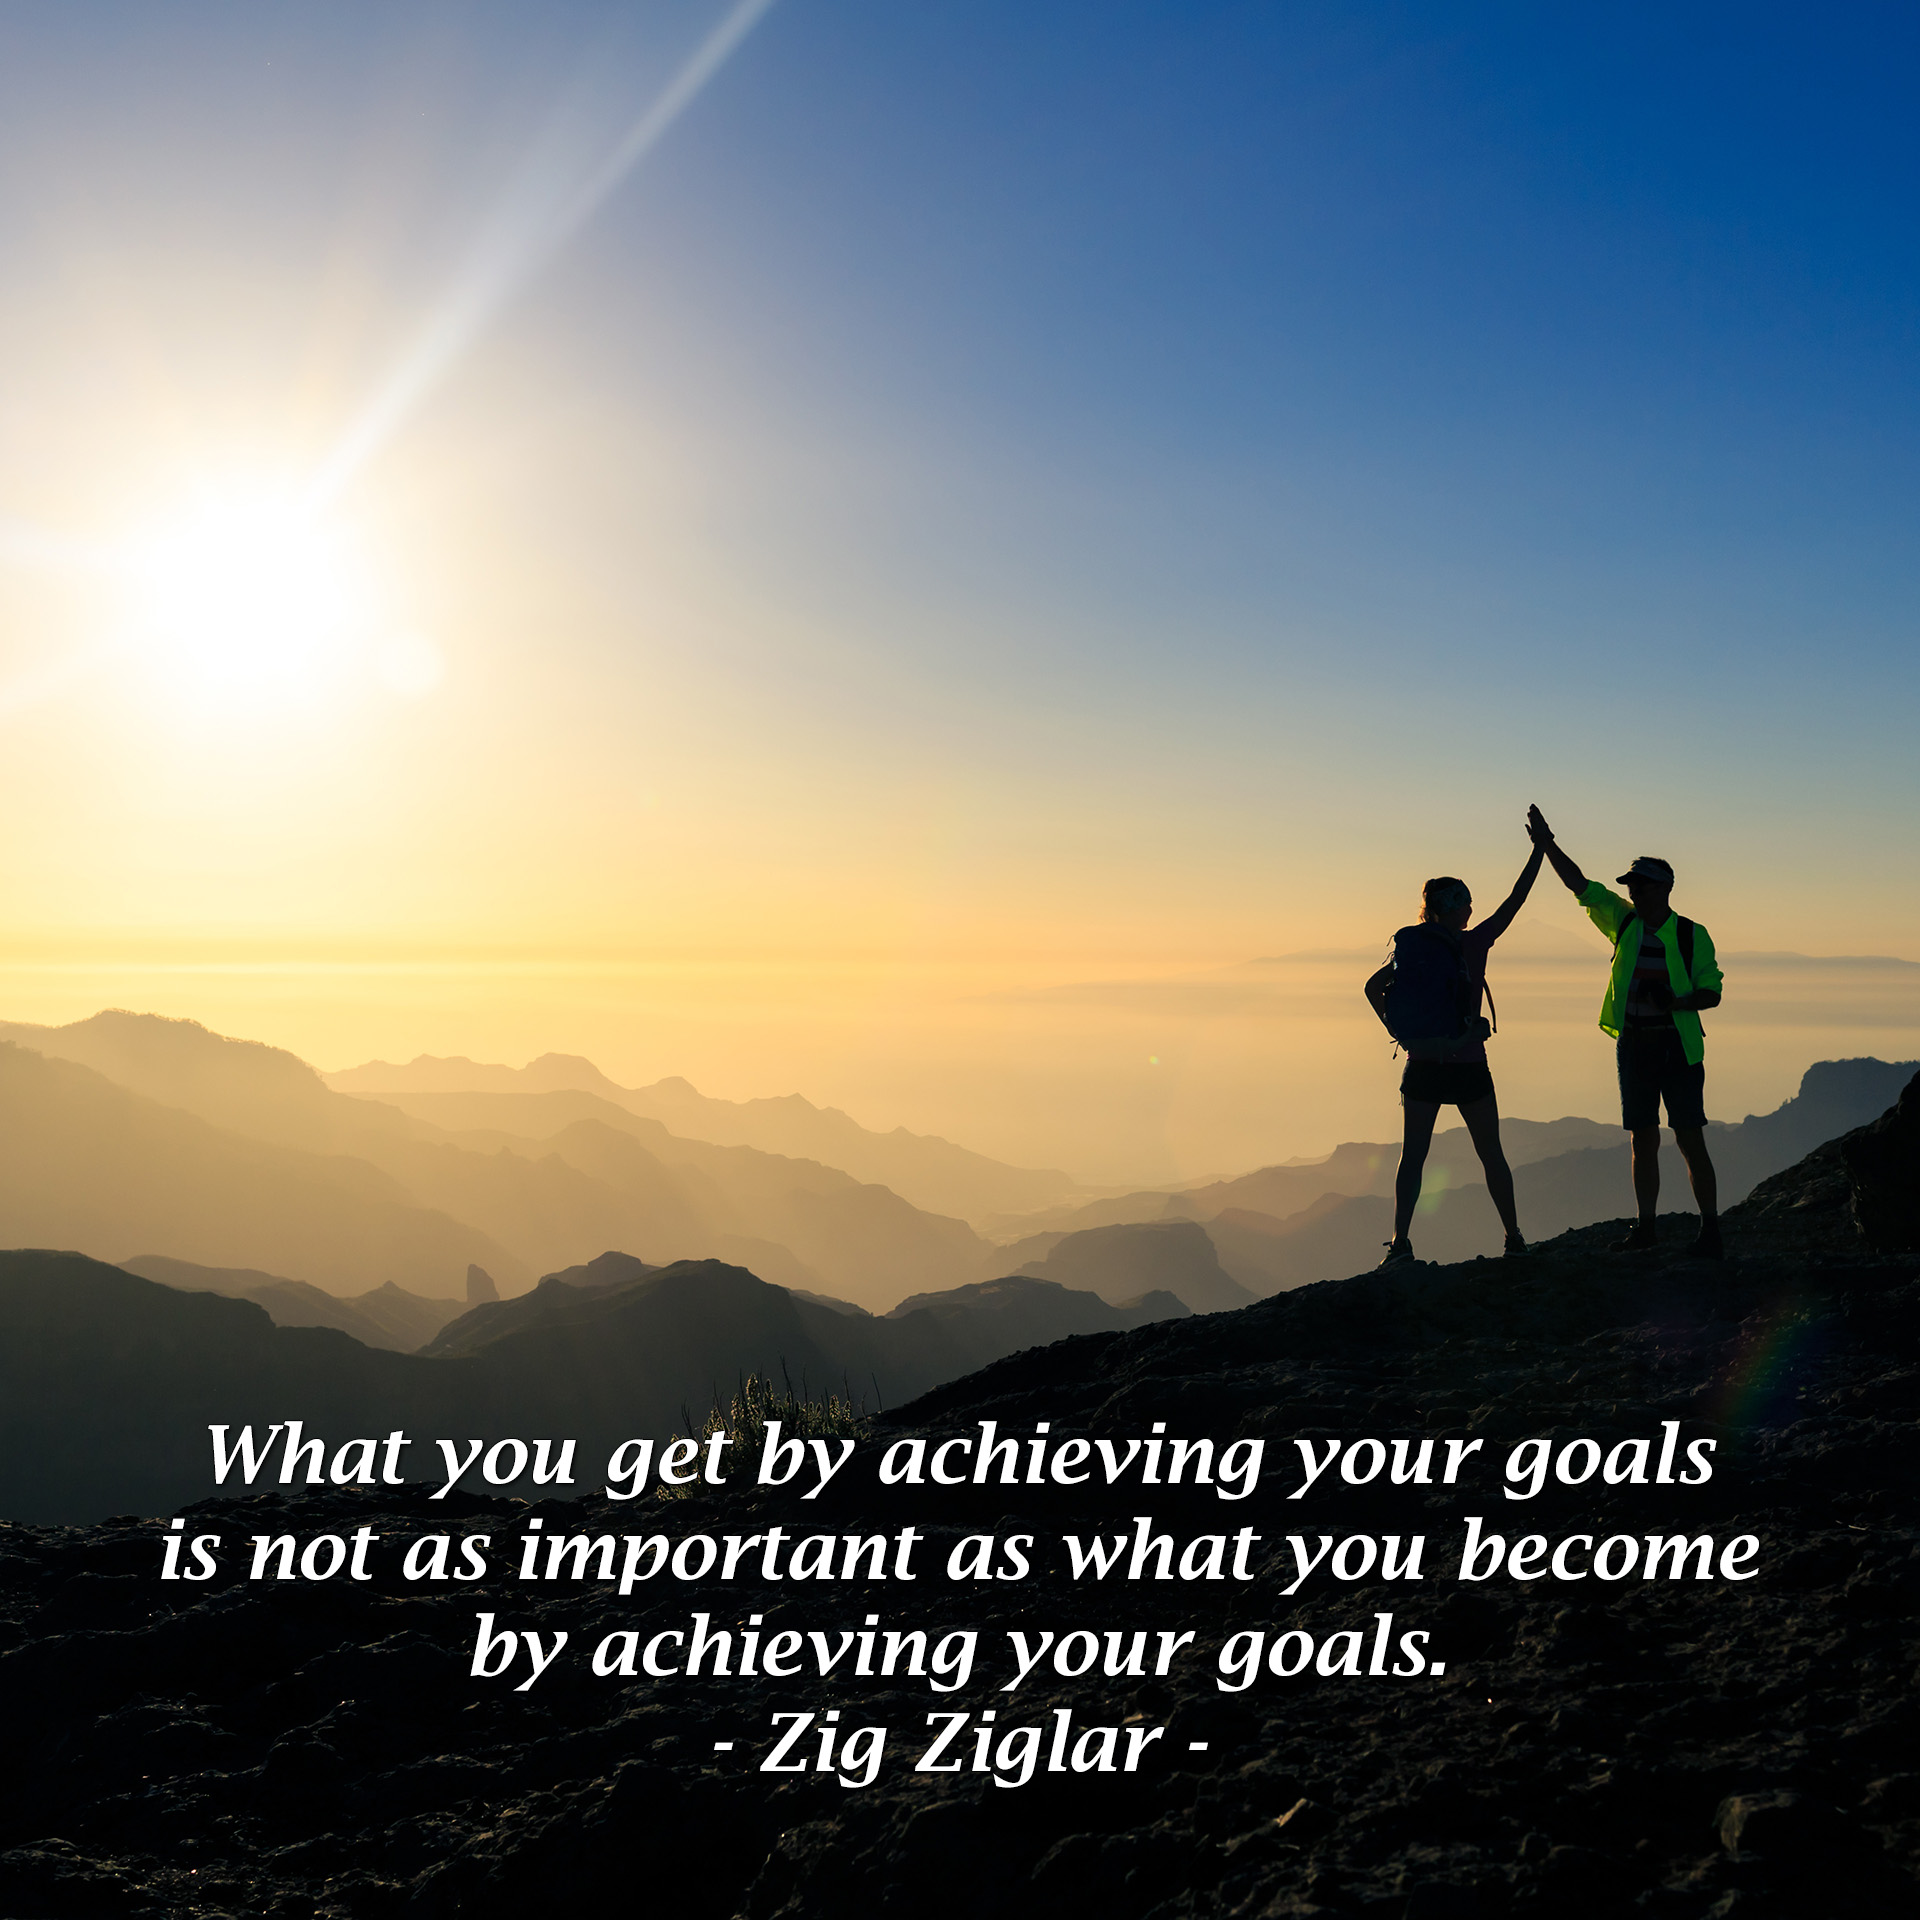 What you get by achieving your goals is not as important as what you become by achieving your goals. - Zig Ziglar